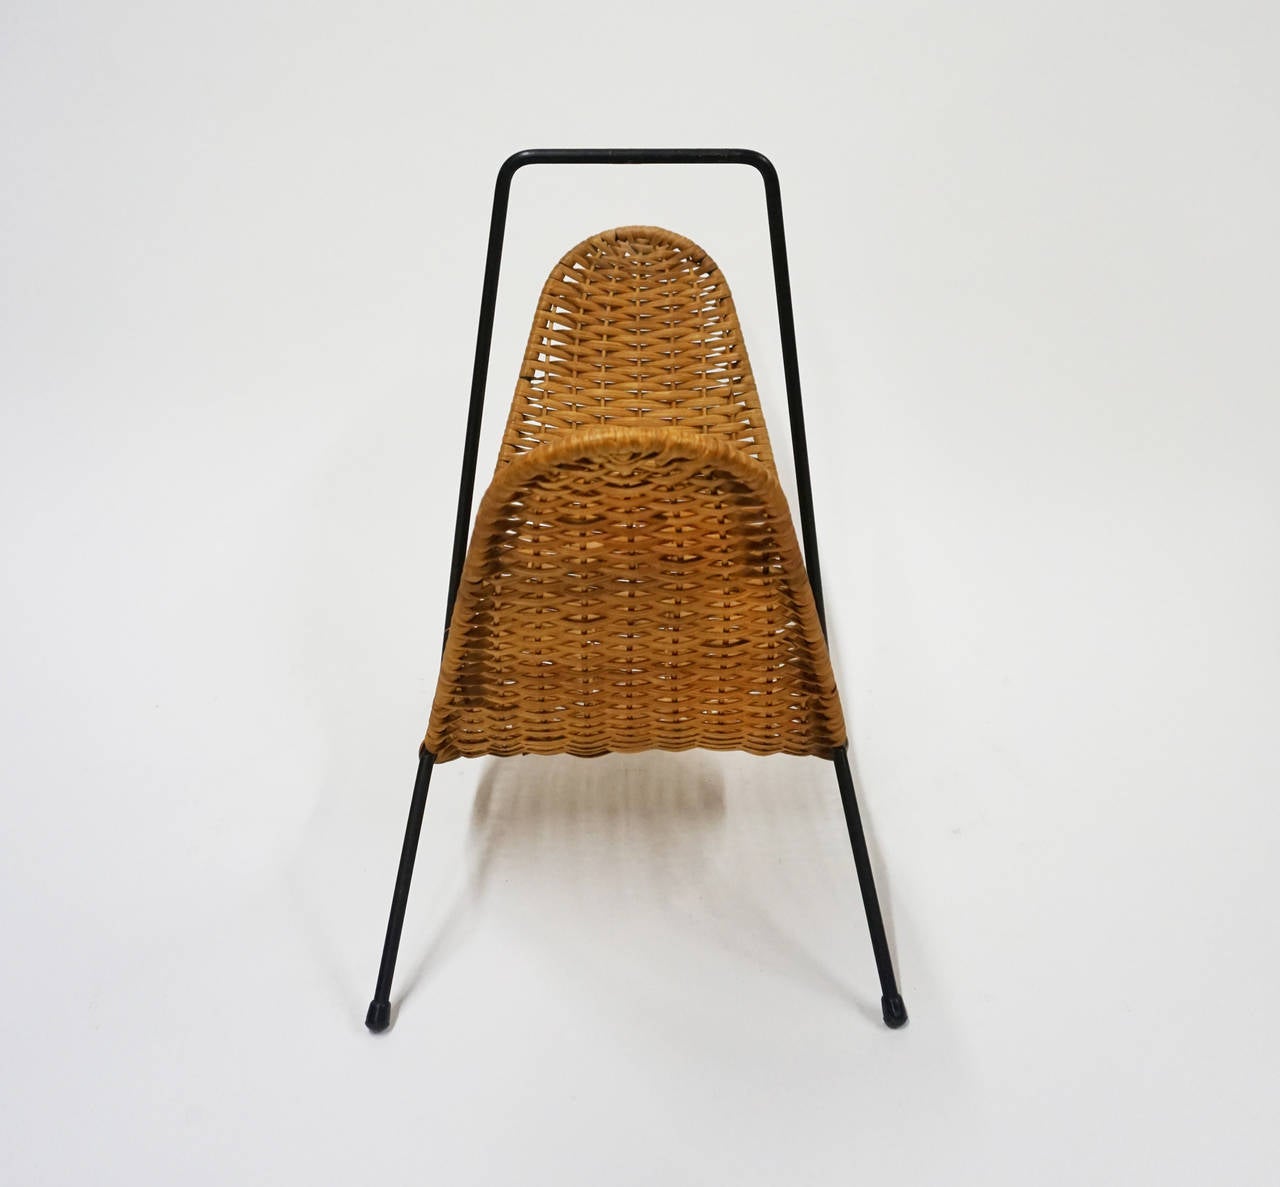 Iron and woven reed magazine rack by Laurids Lonborg of Denmark.